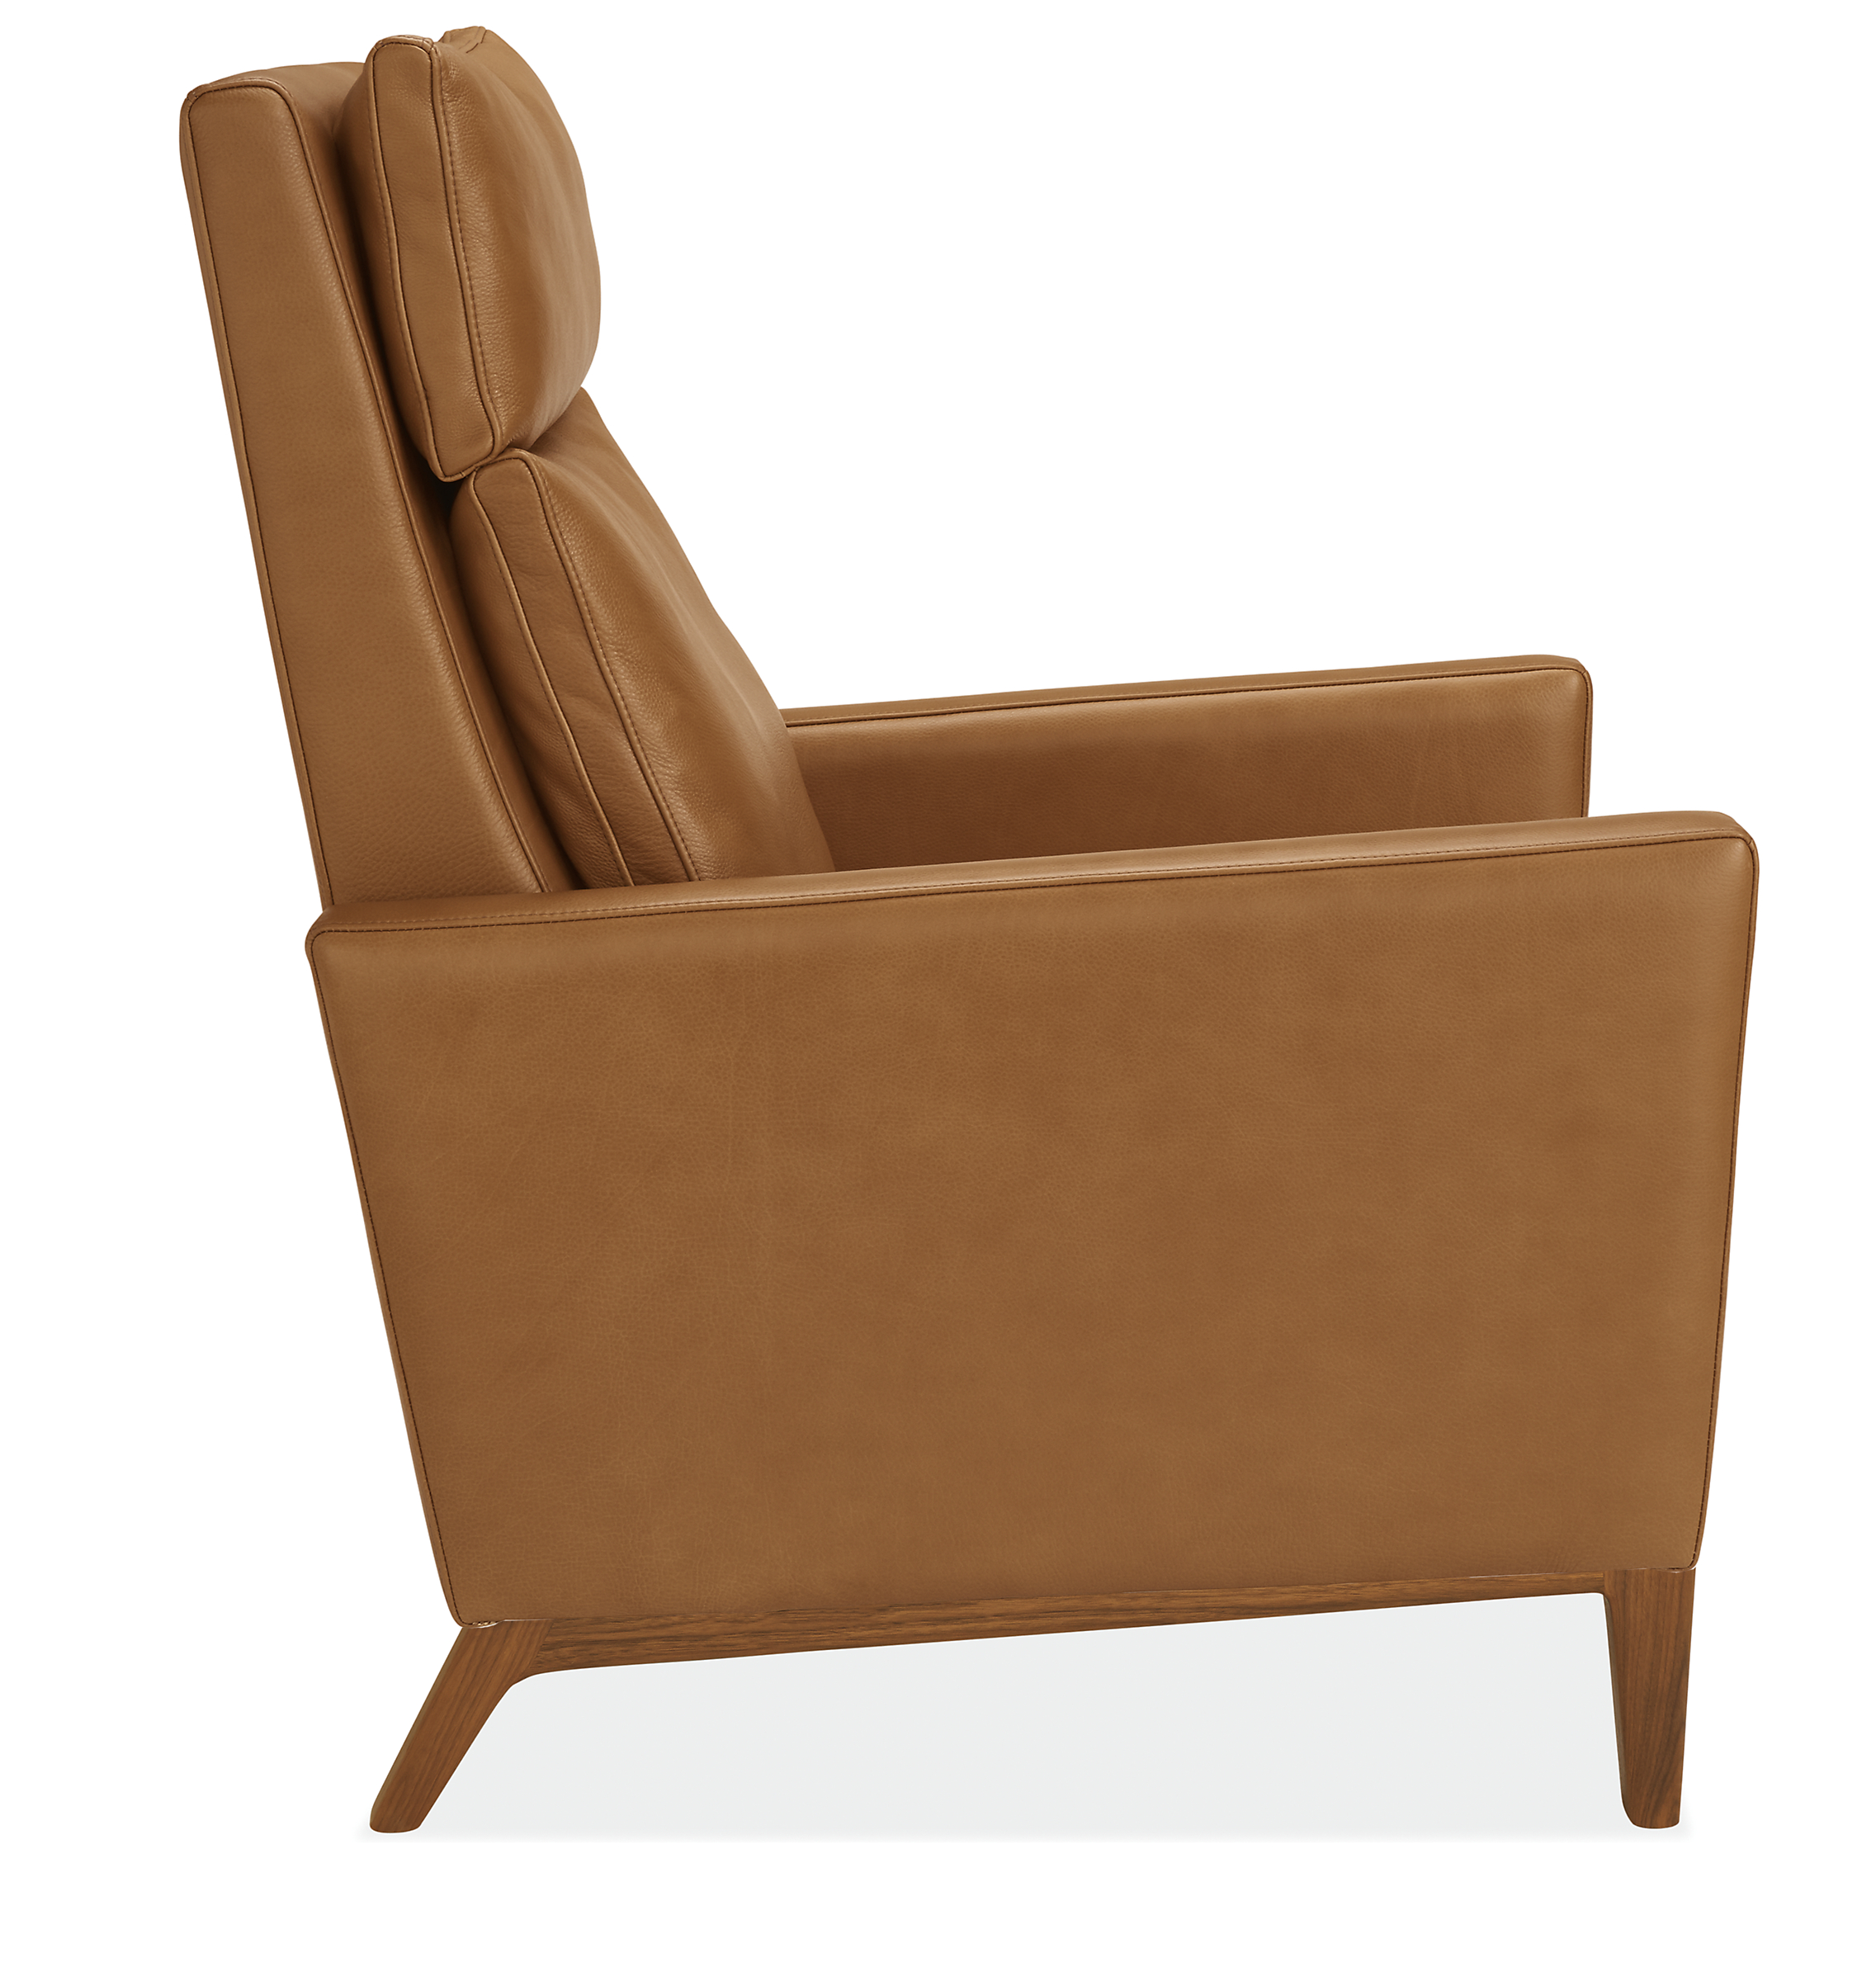 Side view of Isaac Select Recliner Thin-Arm in Lecco Leather with Wood Base.